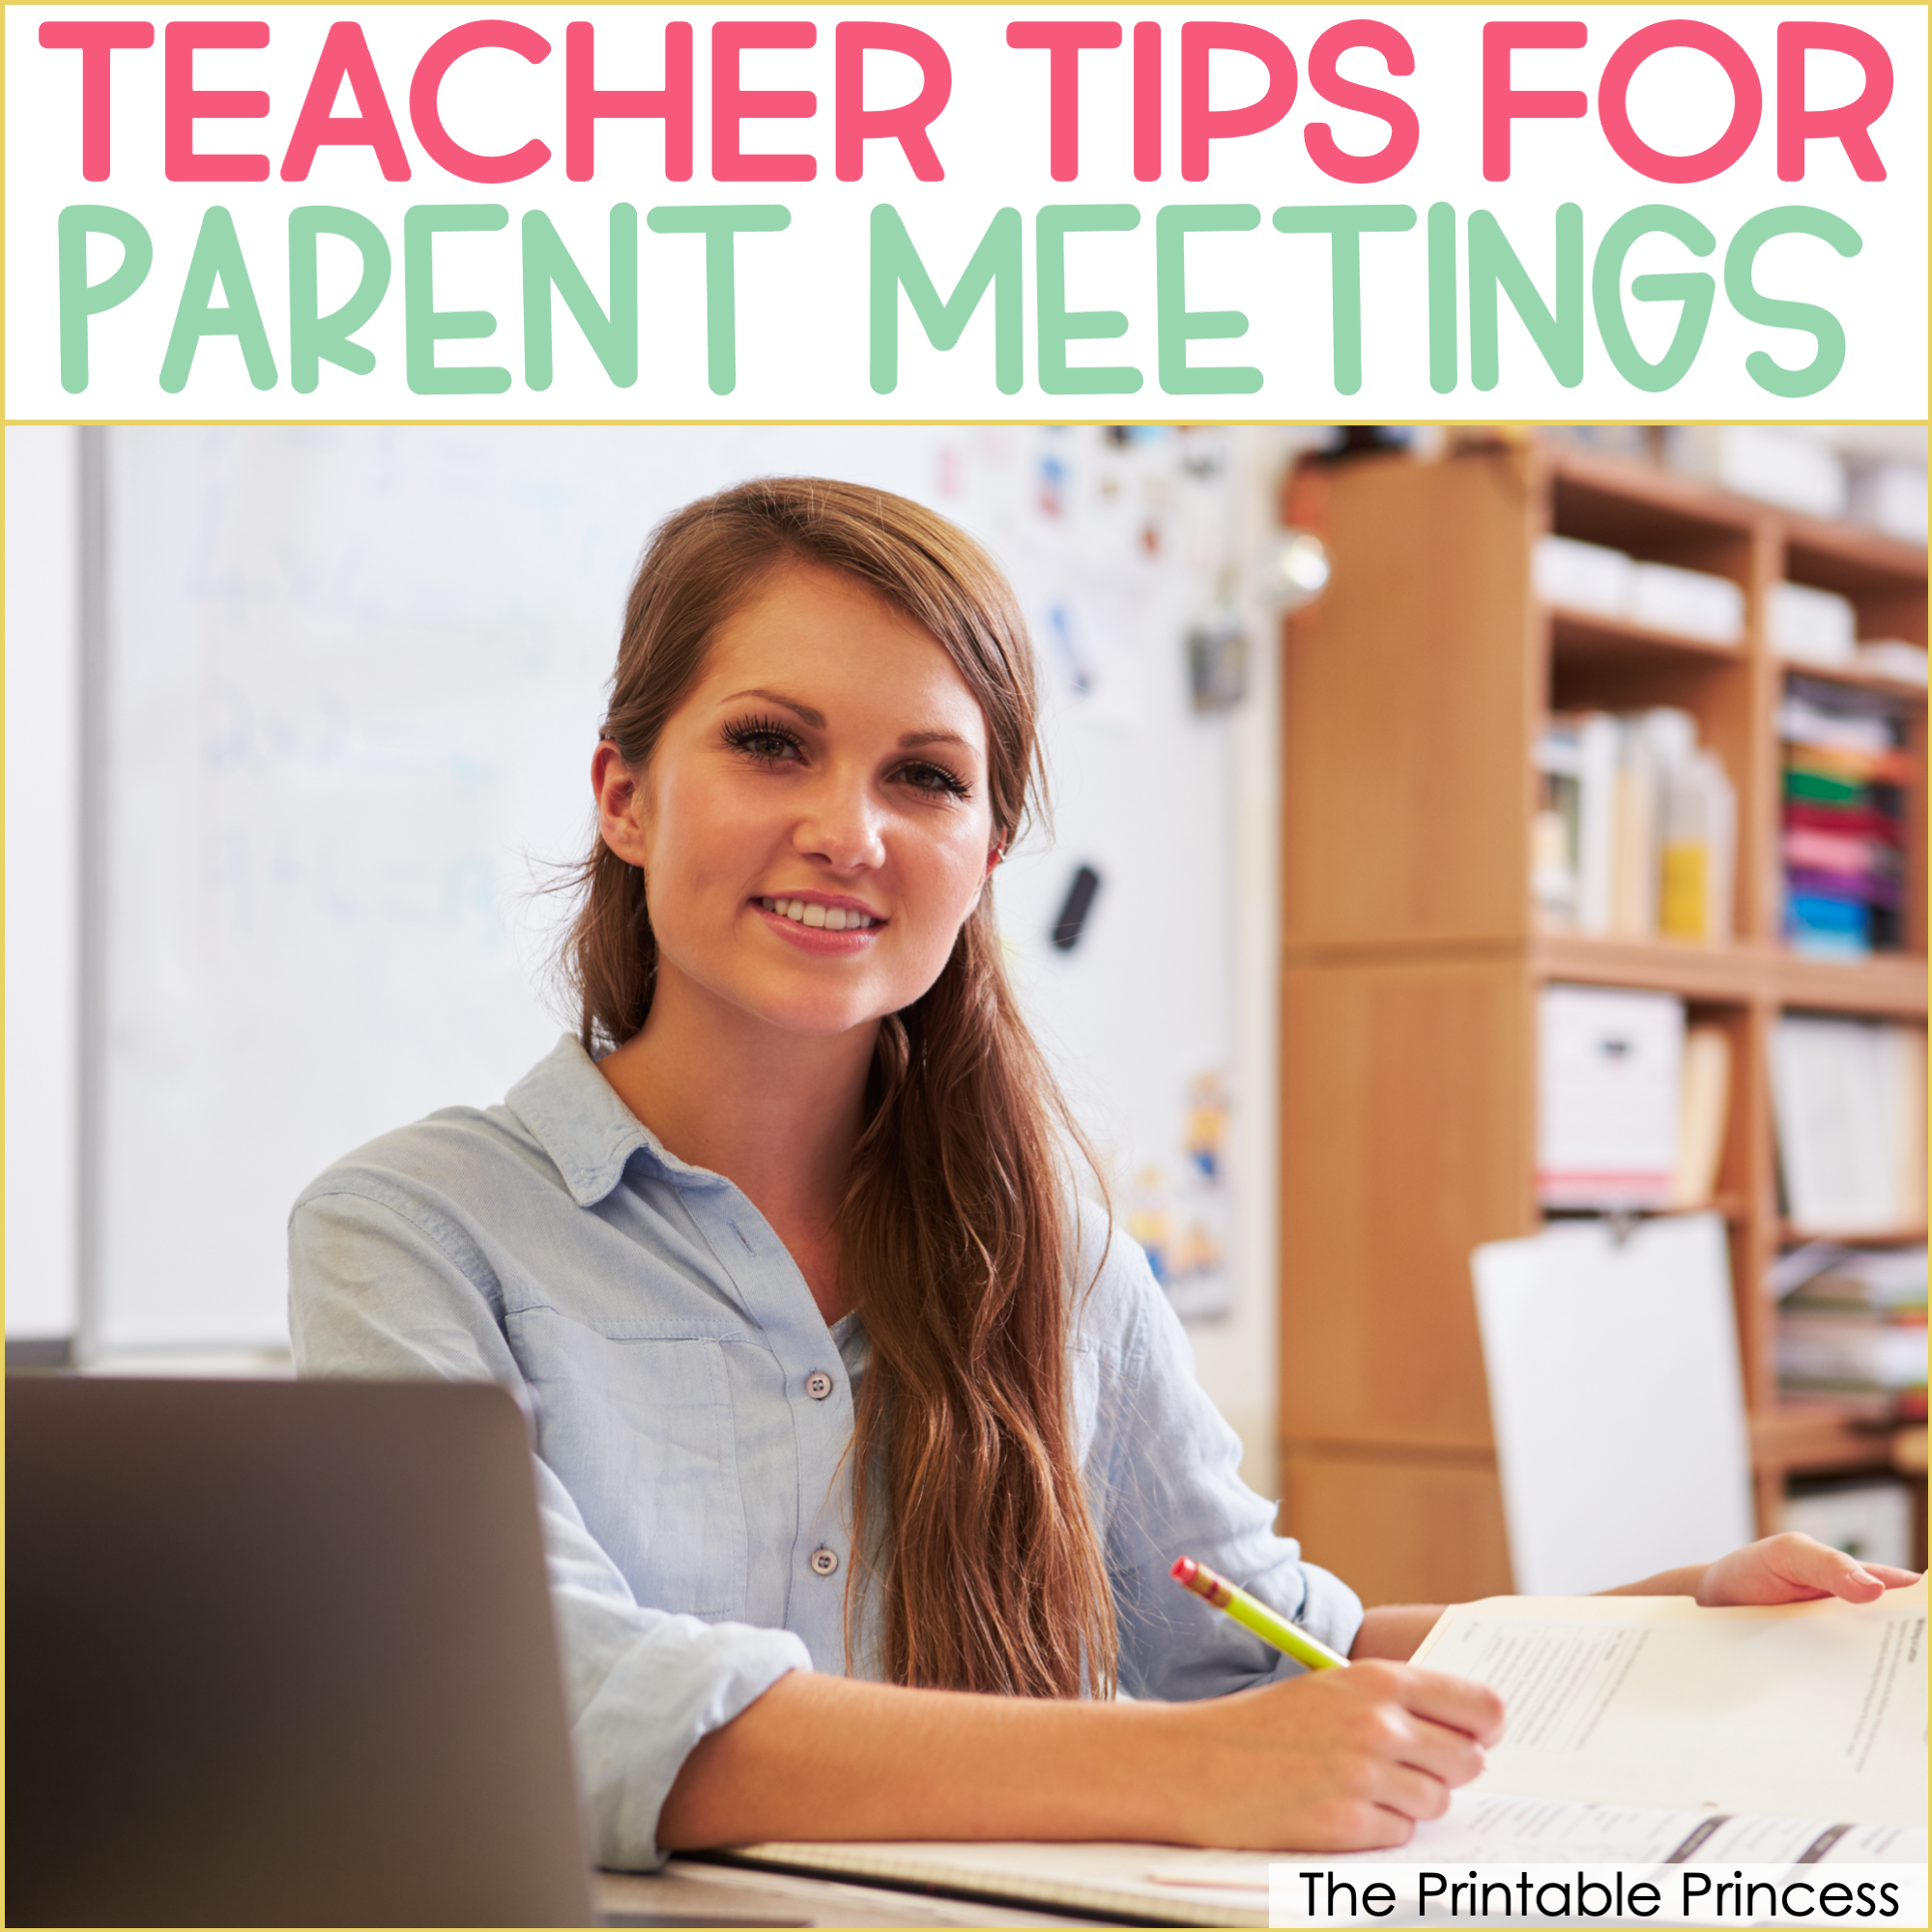 7 Tips for Talking to Parents About Concerns